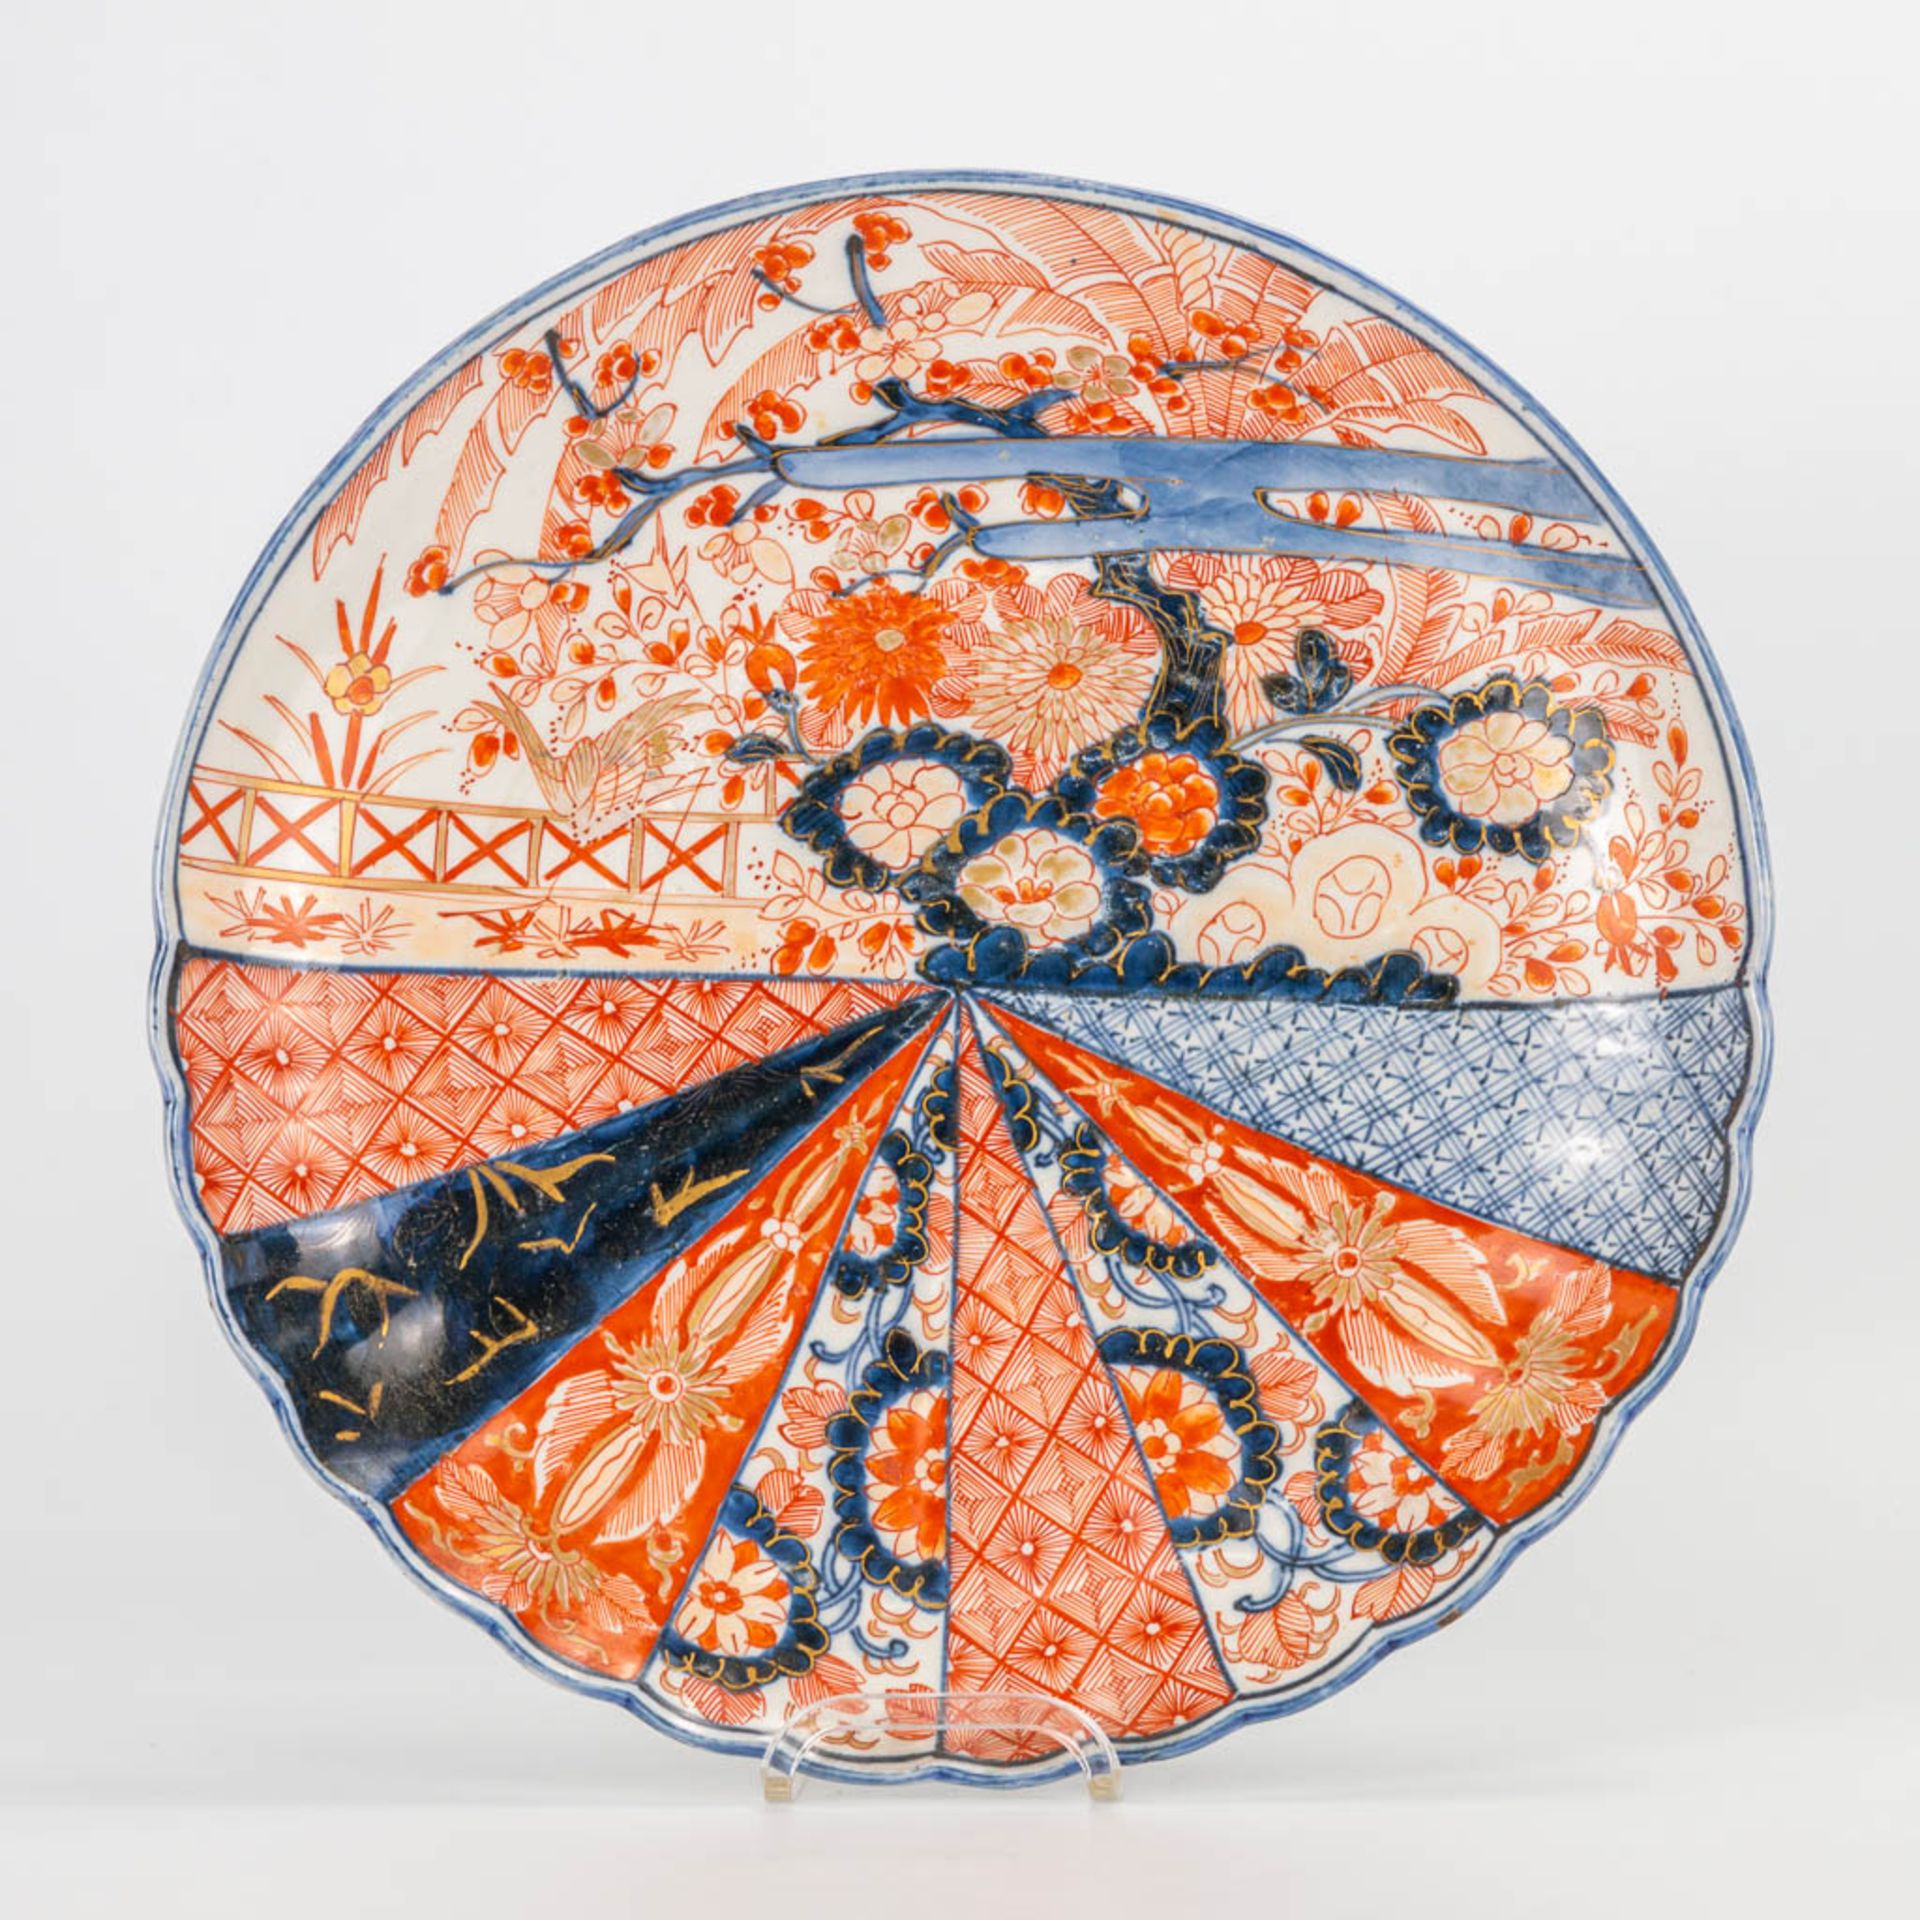 A collection of 5 Imari display plates made of Japanese porcelain. (4,5 x 30 cm) - Image 13 of 16